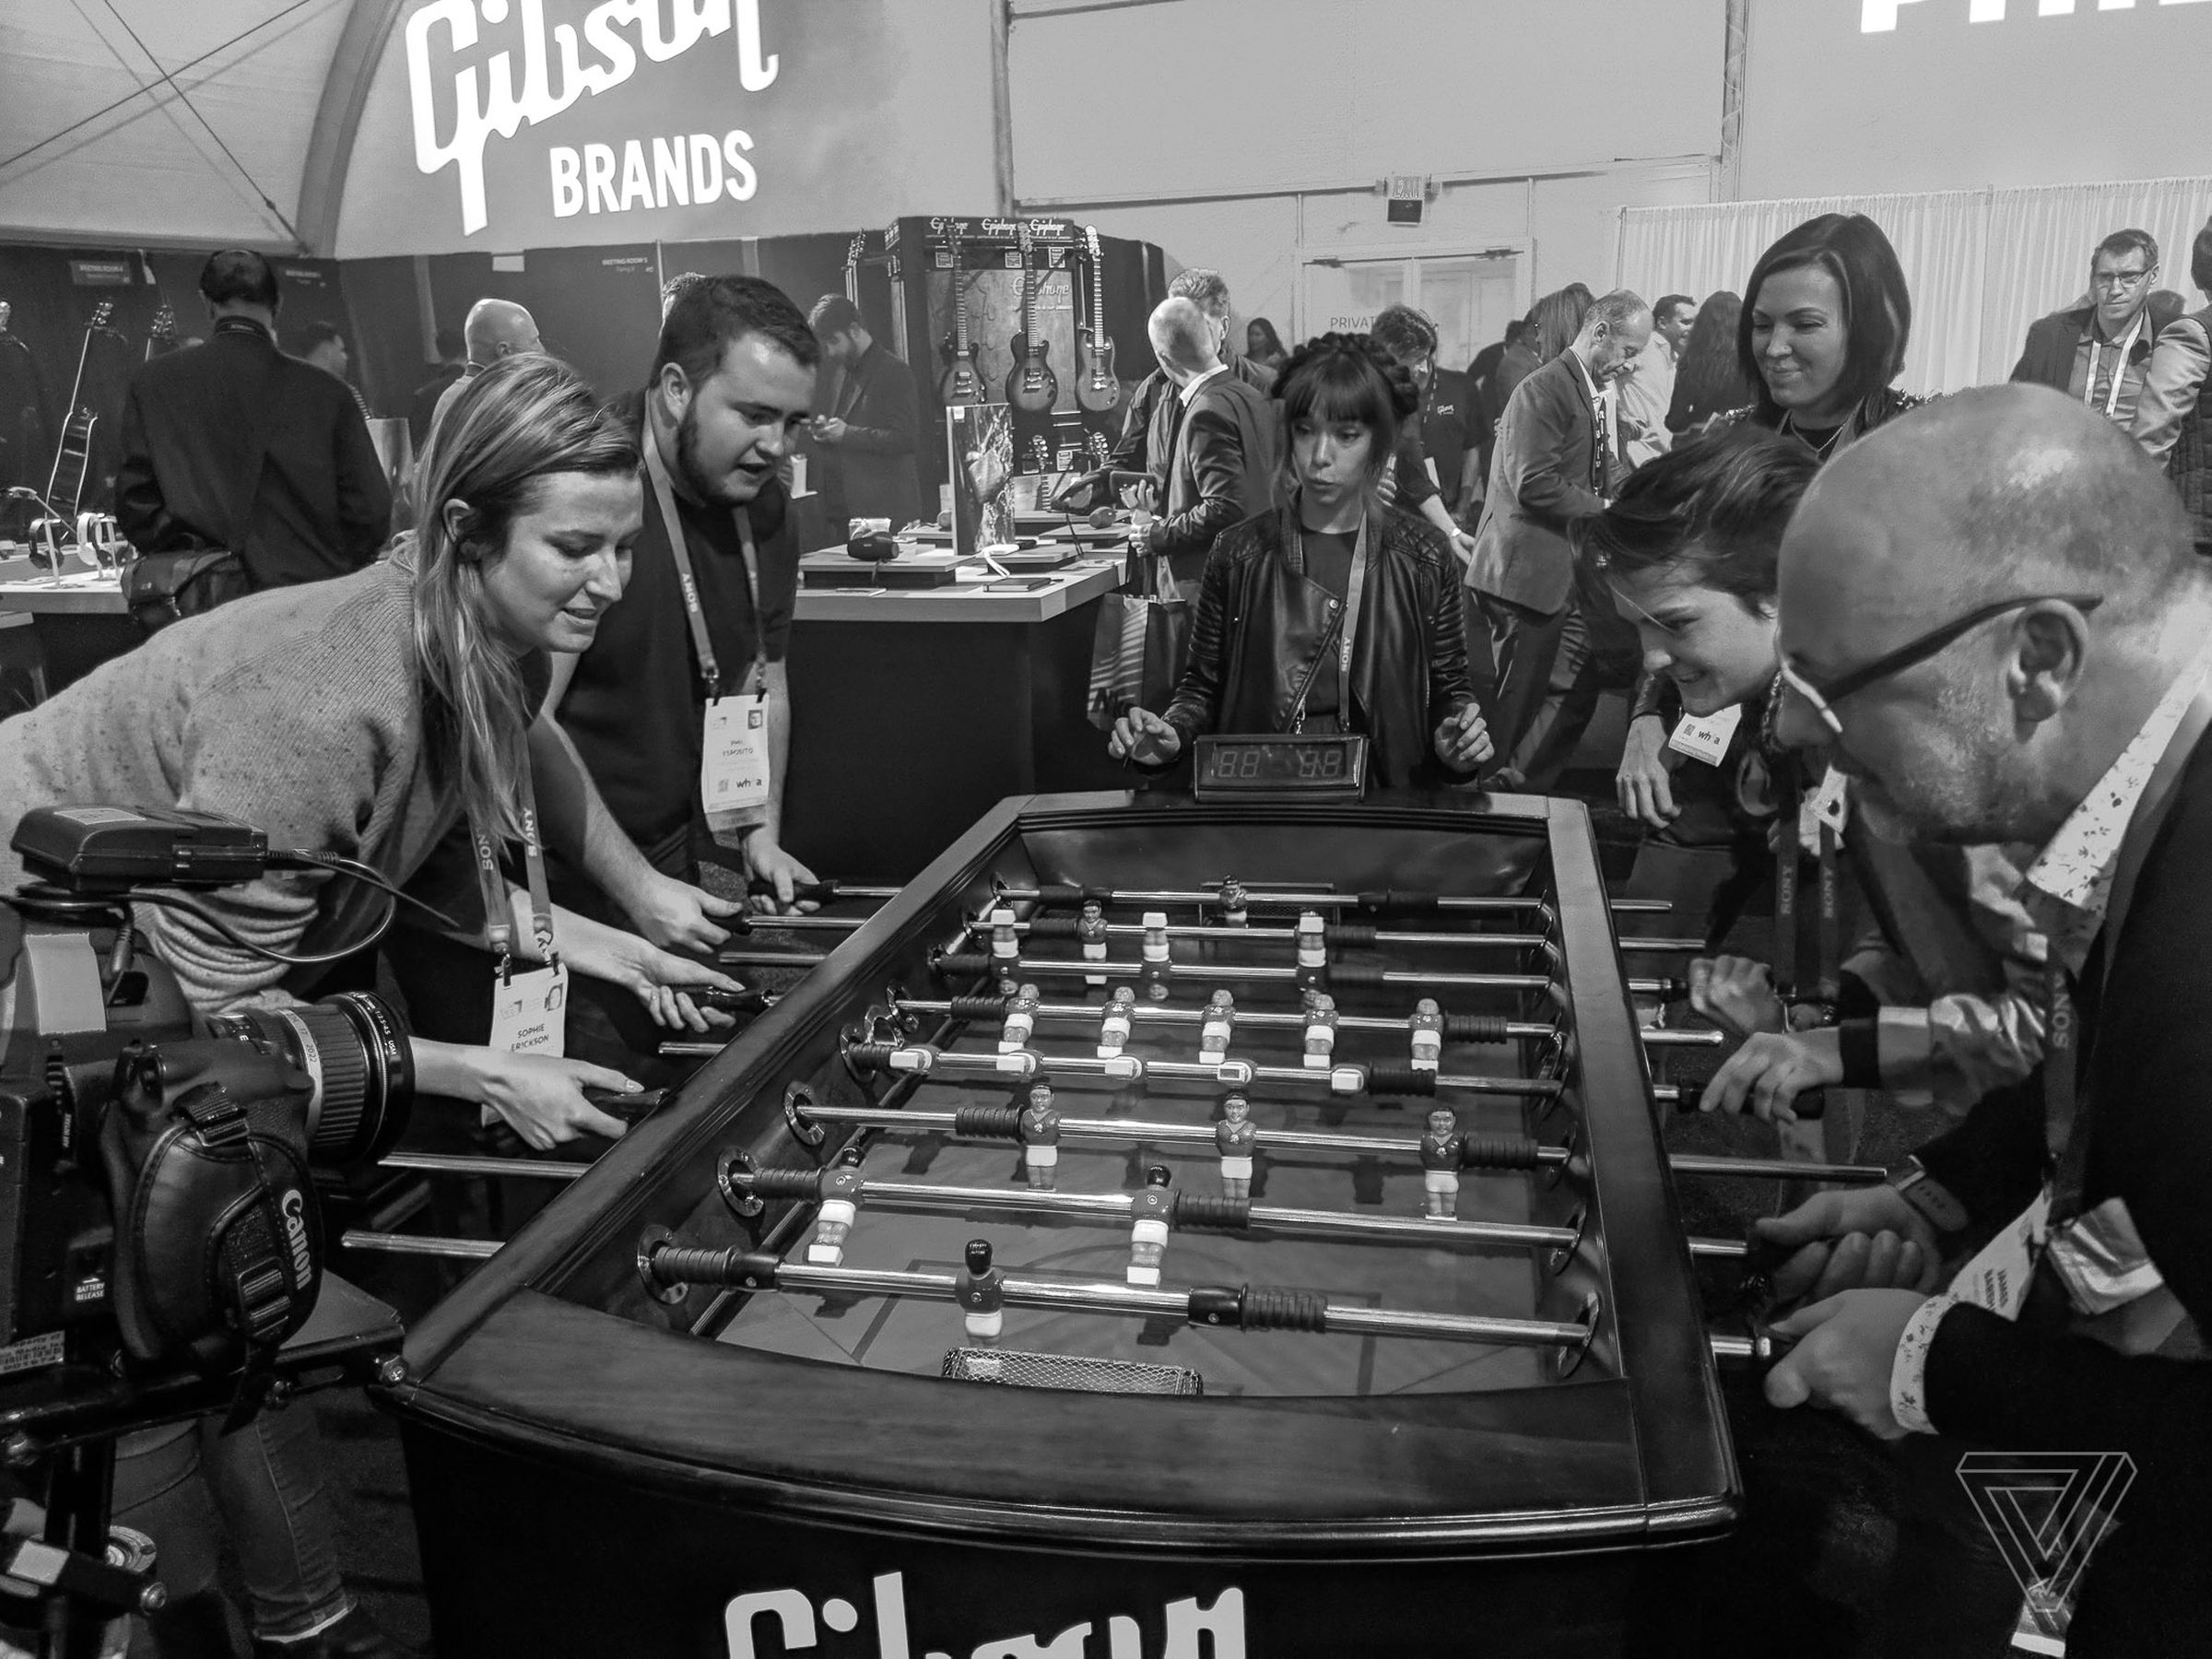 (left to right) Sophie Erickson, Phil Esposito, Sarah Bishop, Dani Deahl, Becca Farsace and James Bareham play table football in the Gibson tent